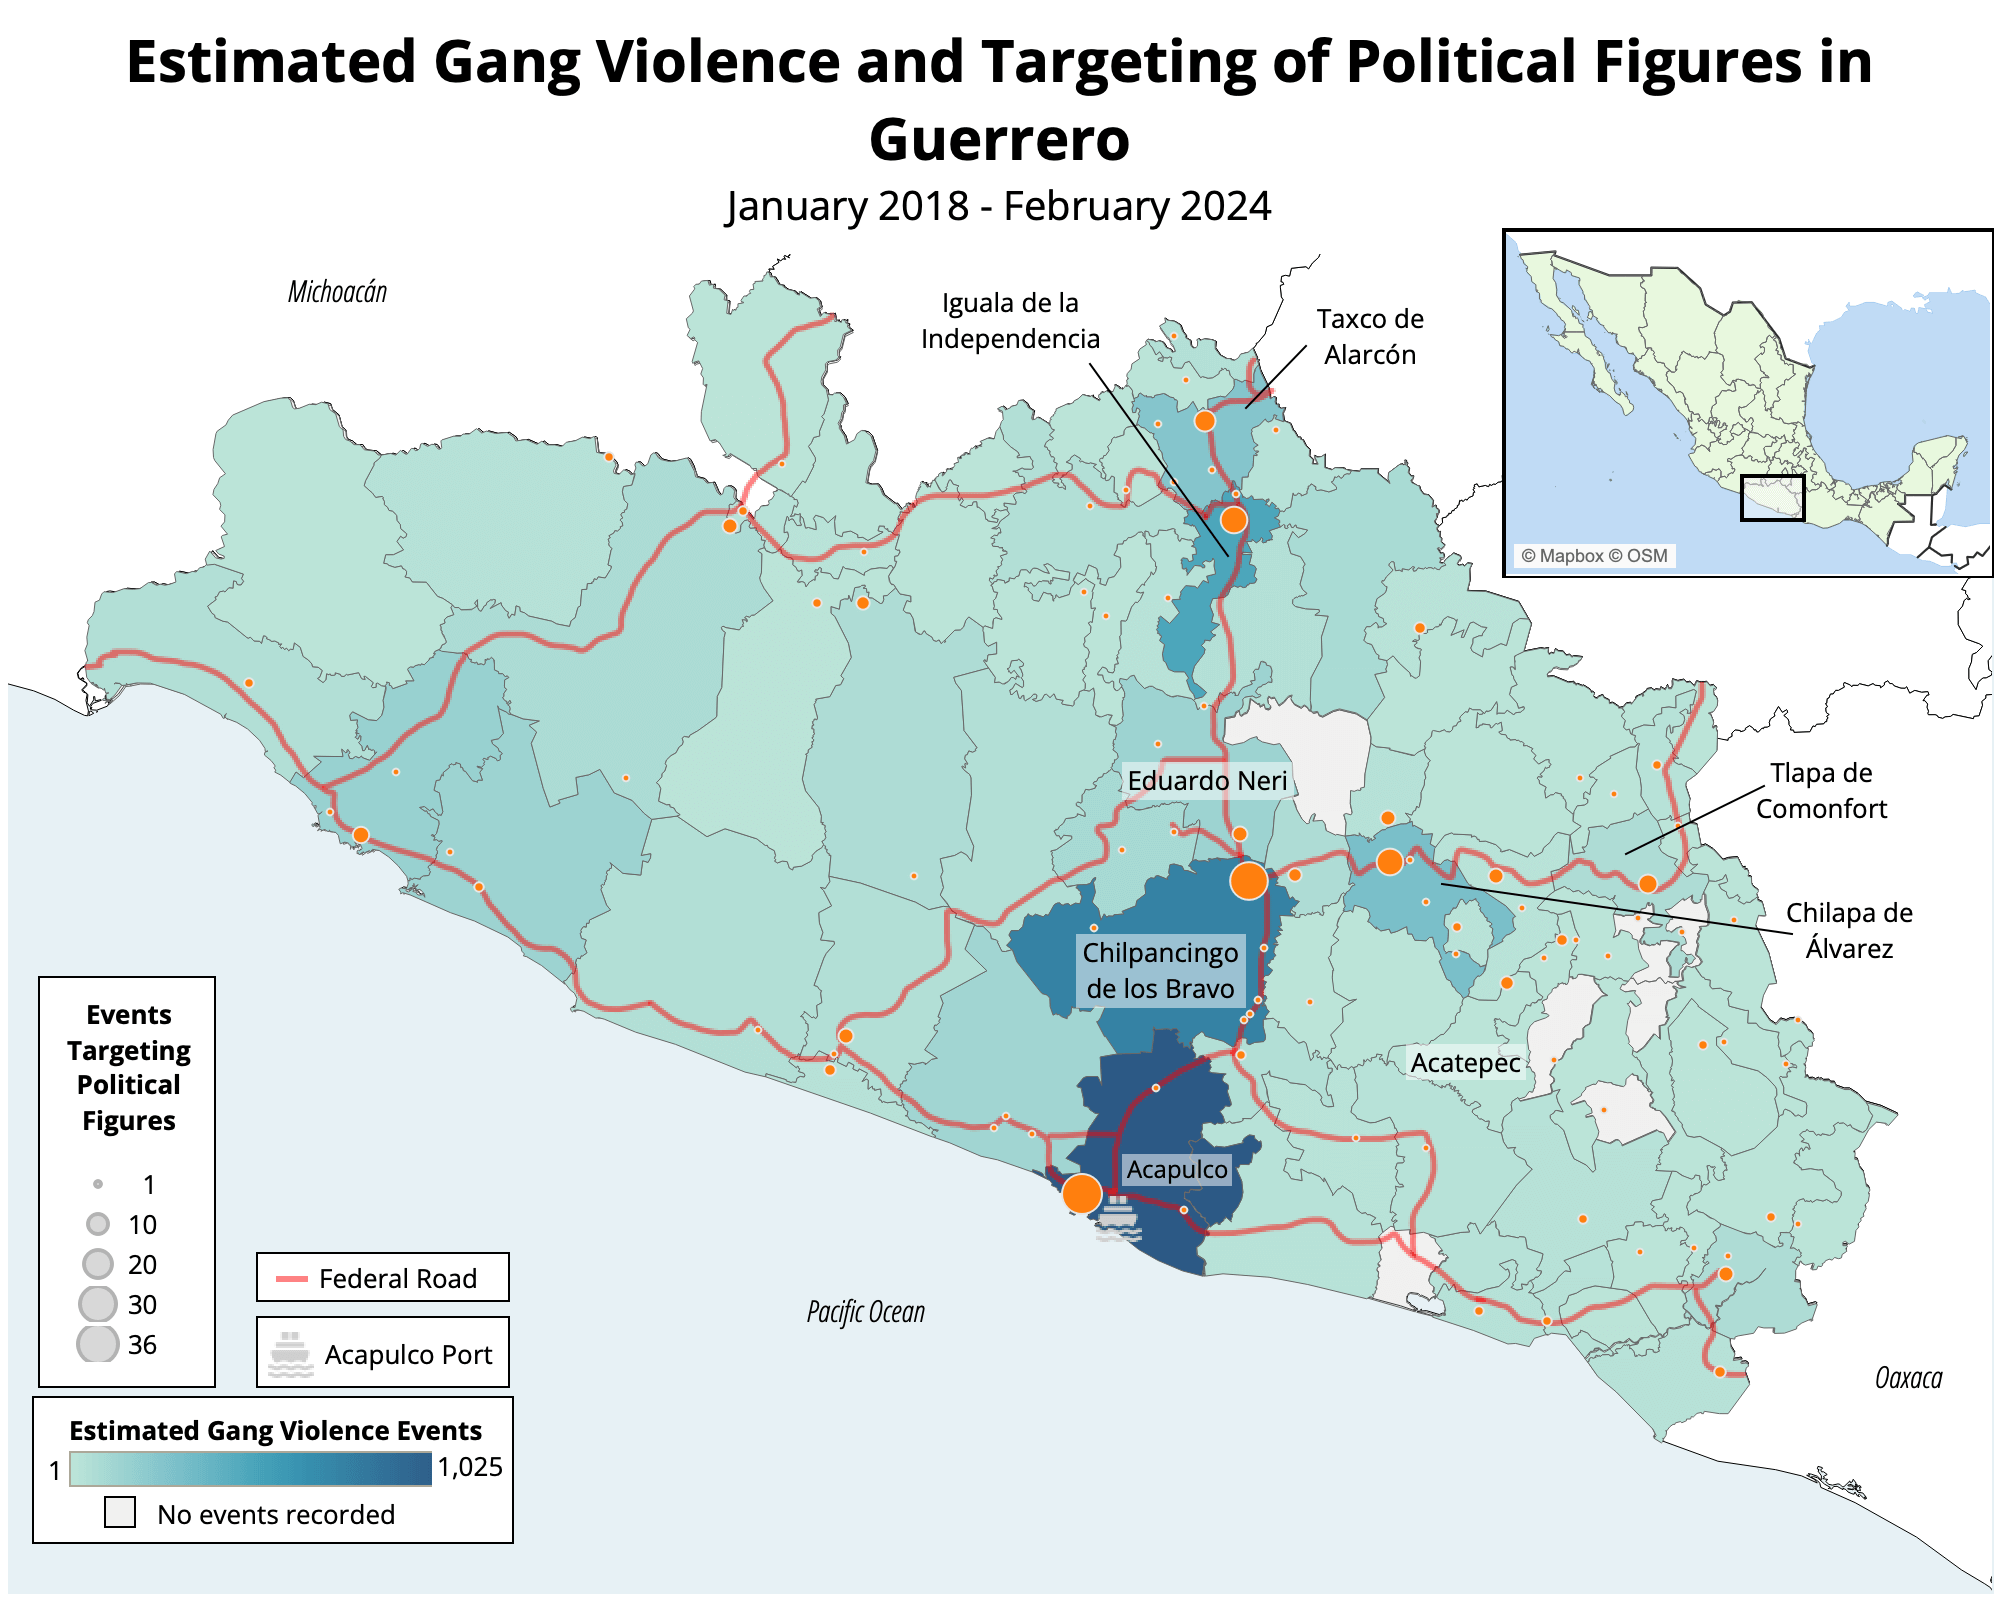 Estimated Gang violence and targeting of political figures in Guerrero